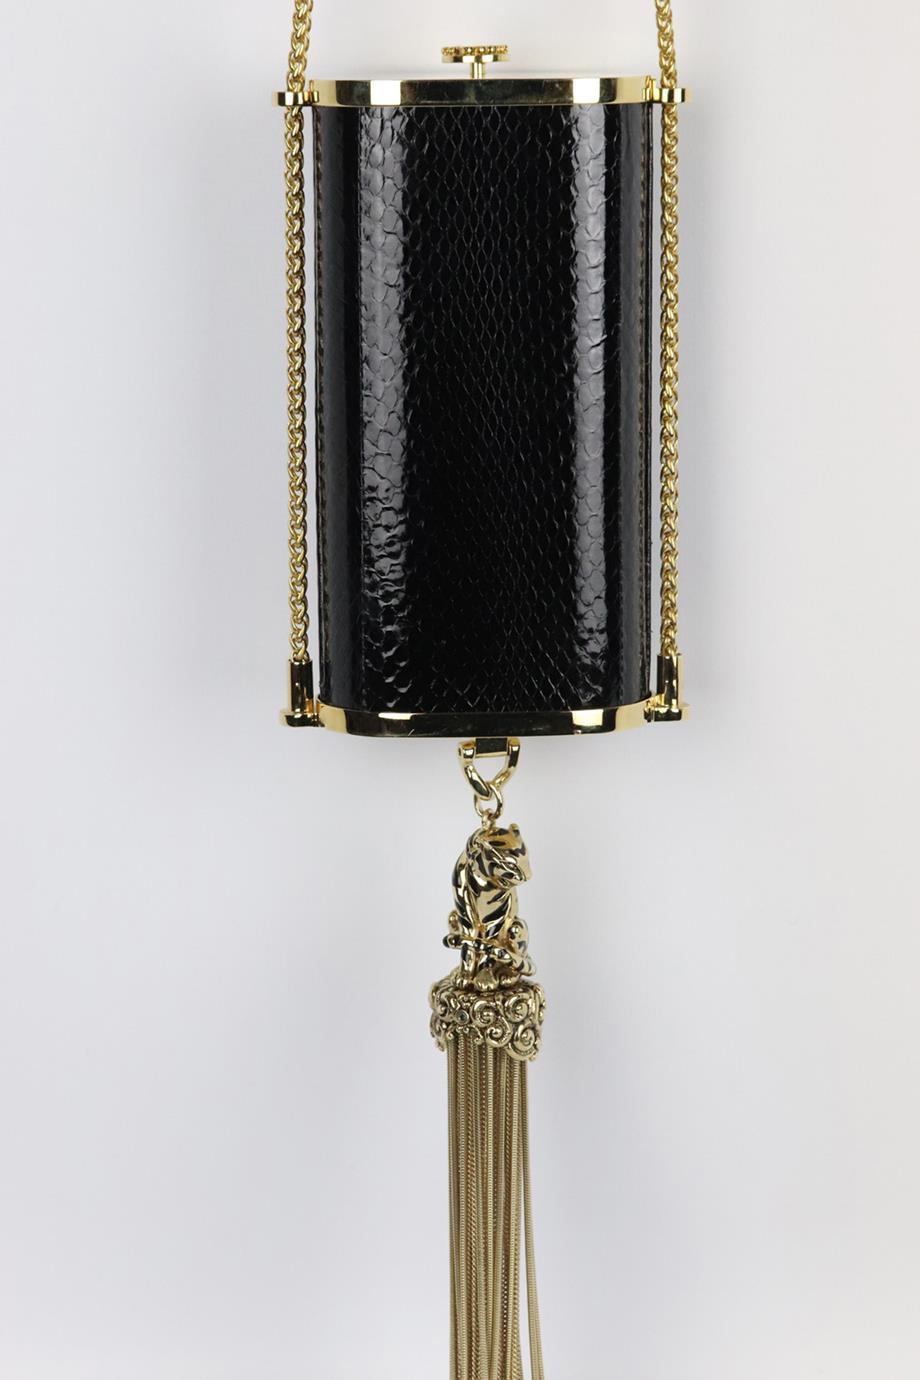 Roberto Cavalli gold tone python cylinder shoulder bag. Made from gold-tone hardware with black python in a cylinder shape and finished with a tasseled tiger. Black. Push lock fastening at top. Does not come with dustbag or box. Width: 3.5 in.